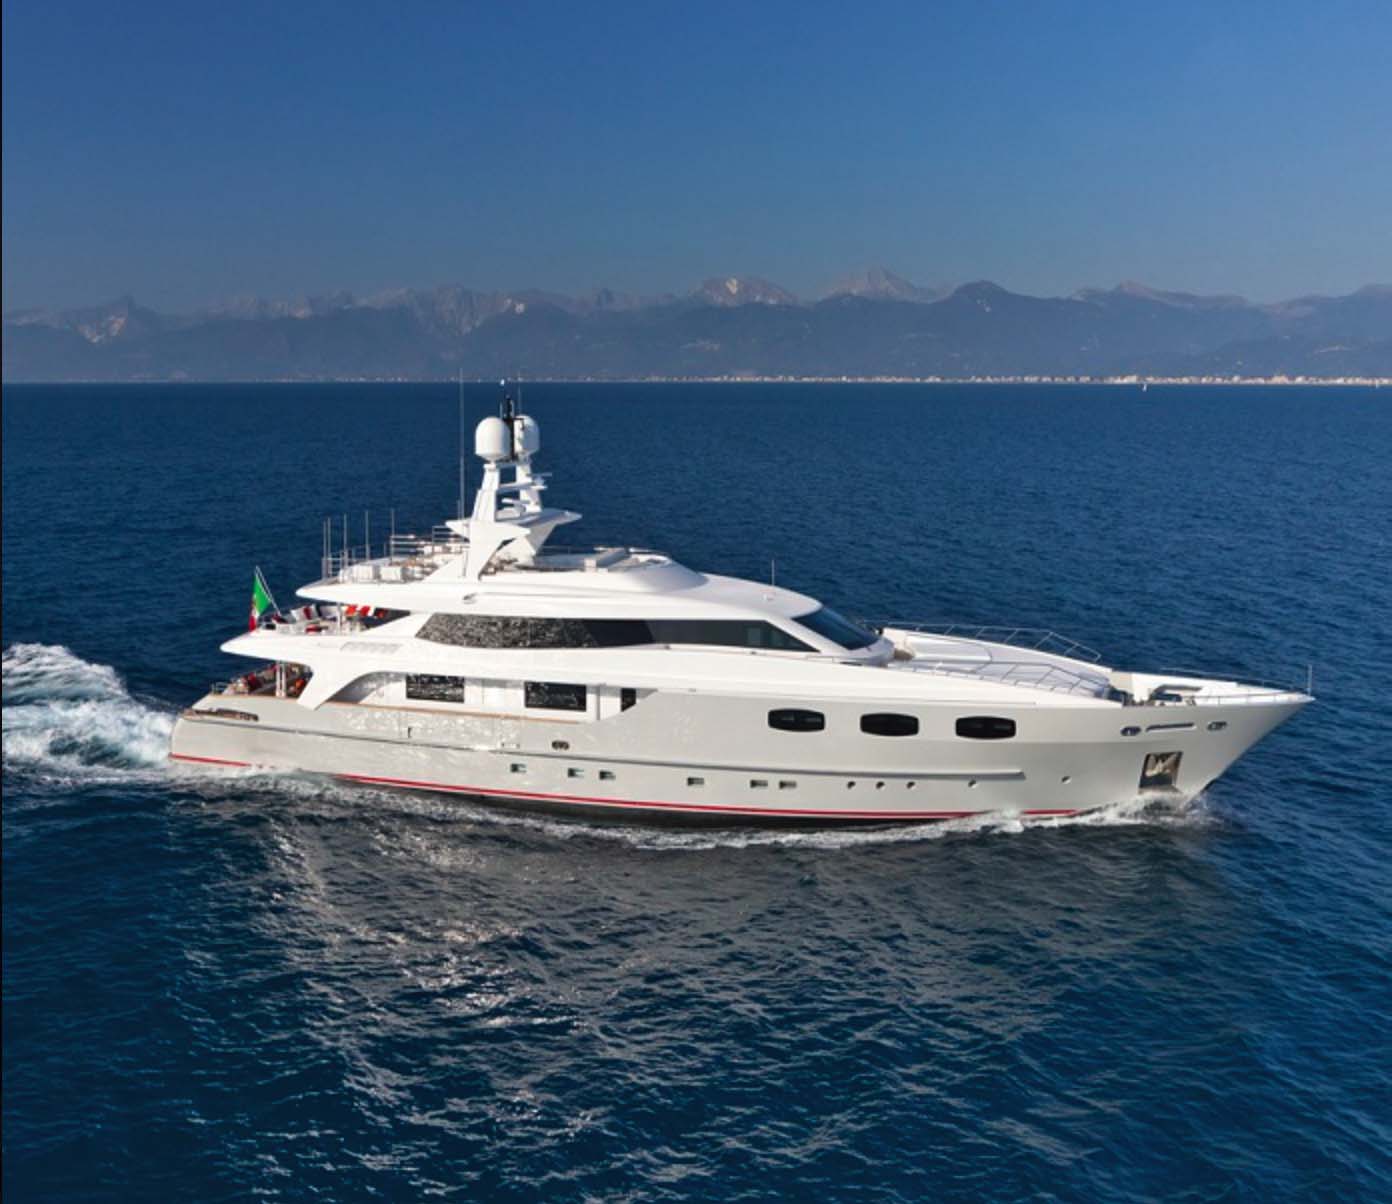 baglietto - WHY WORRY - Paskowsky Yacht Design